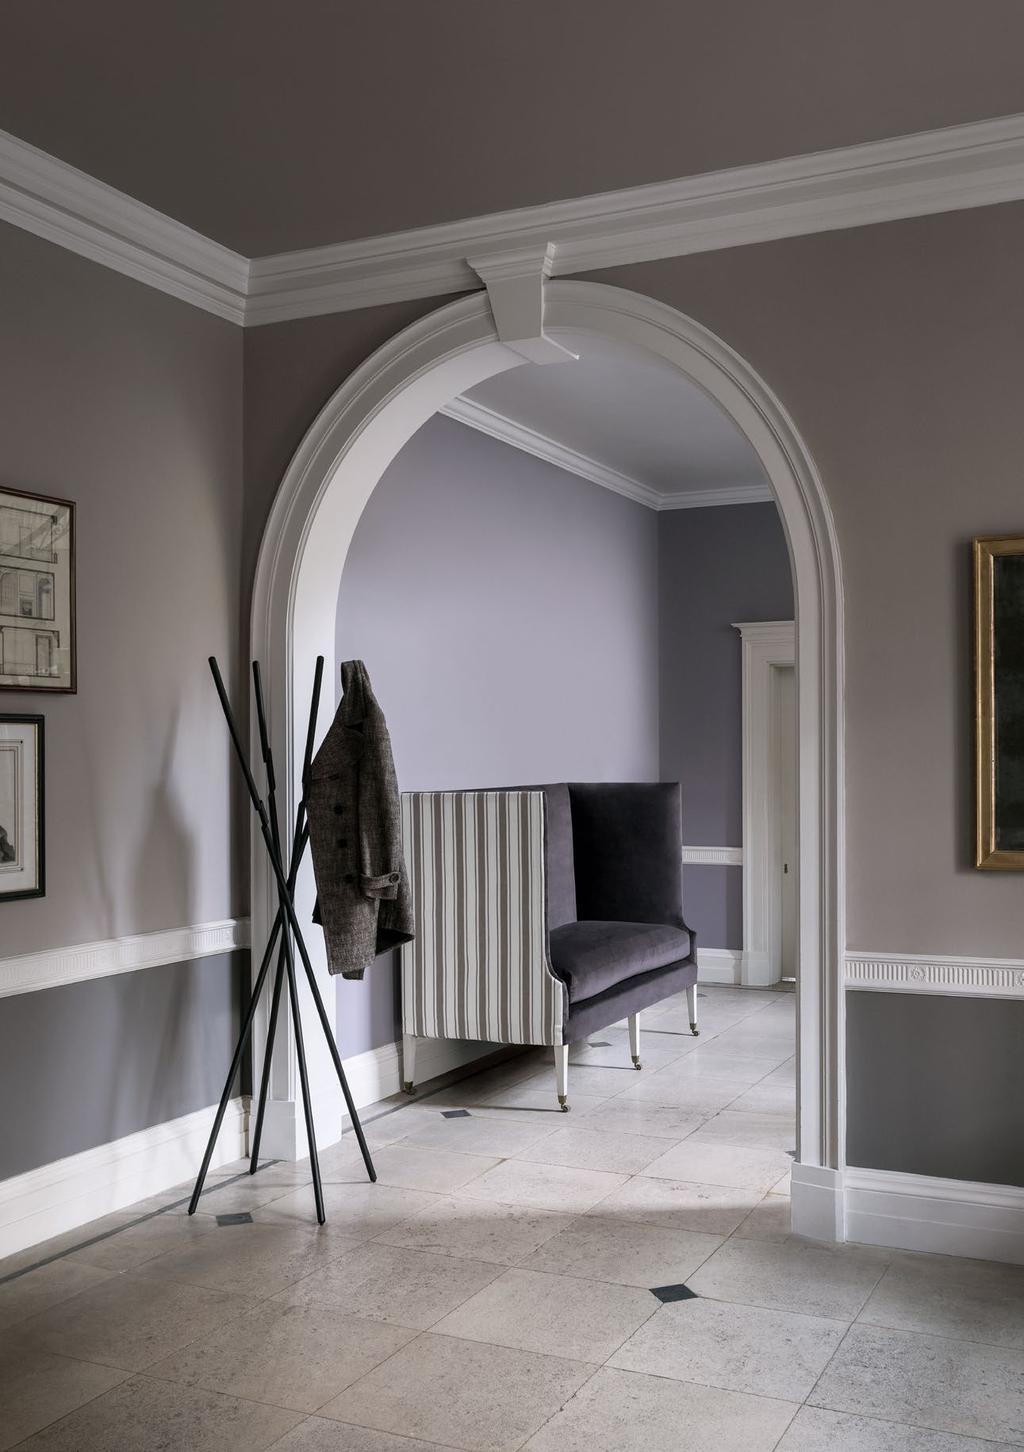 RELATED In related schemes, one dominant colour is used with a calm companion and a supporting neutral on the woodwork and ceiling.